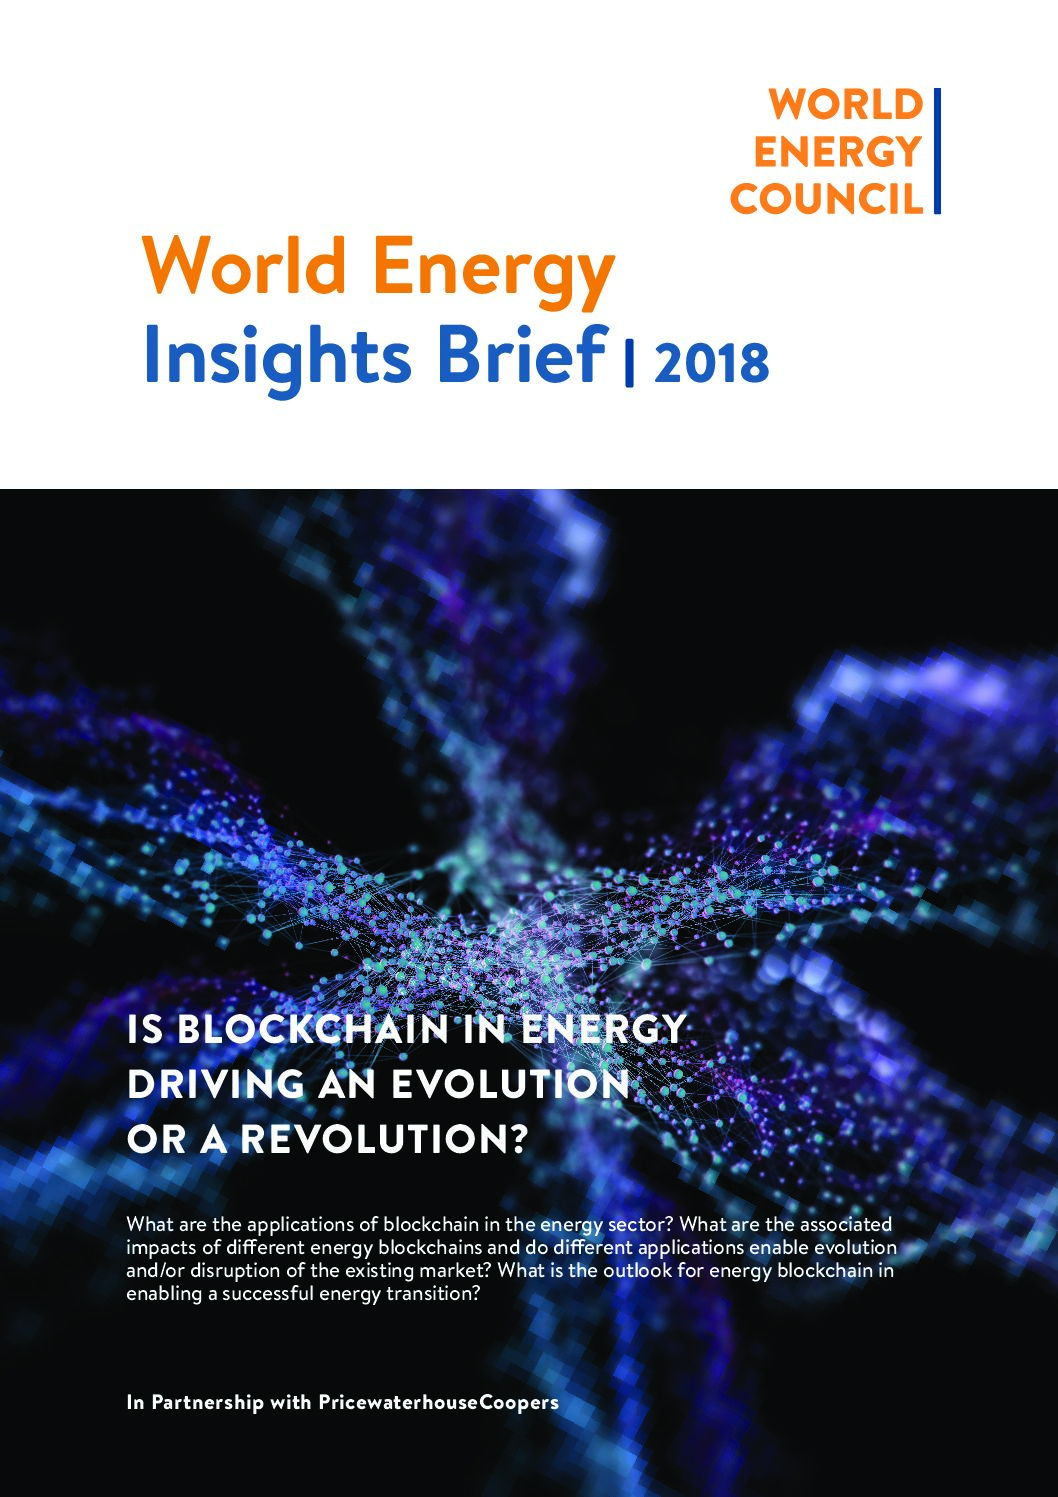 IS BLOCKCHAIN IN ENERGY DRIVING AN EVOLUTION OR A REVOLUTION? World Energy Council